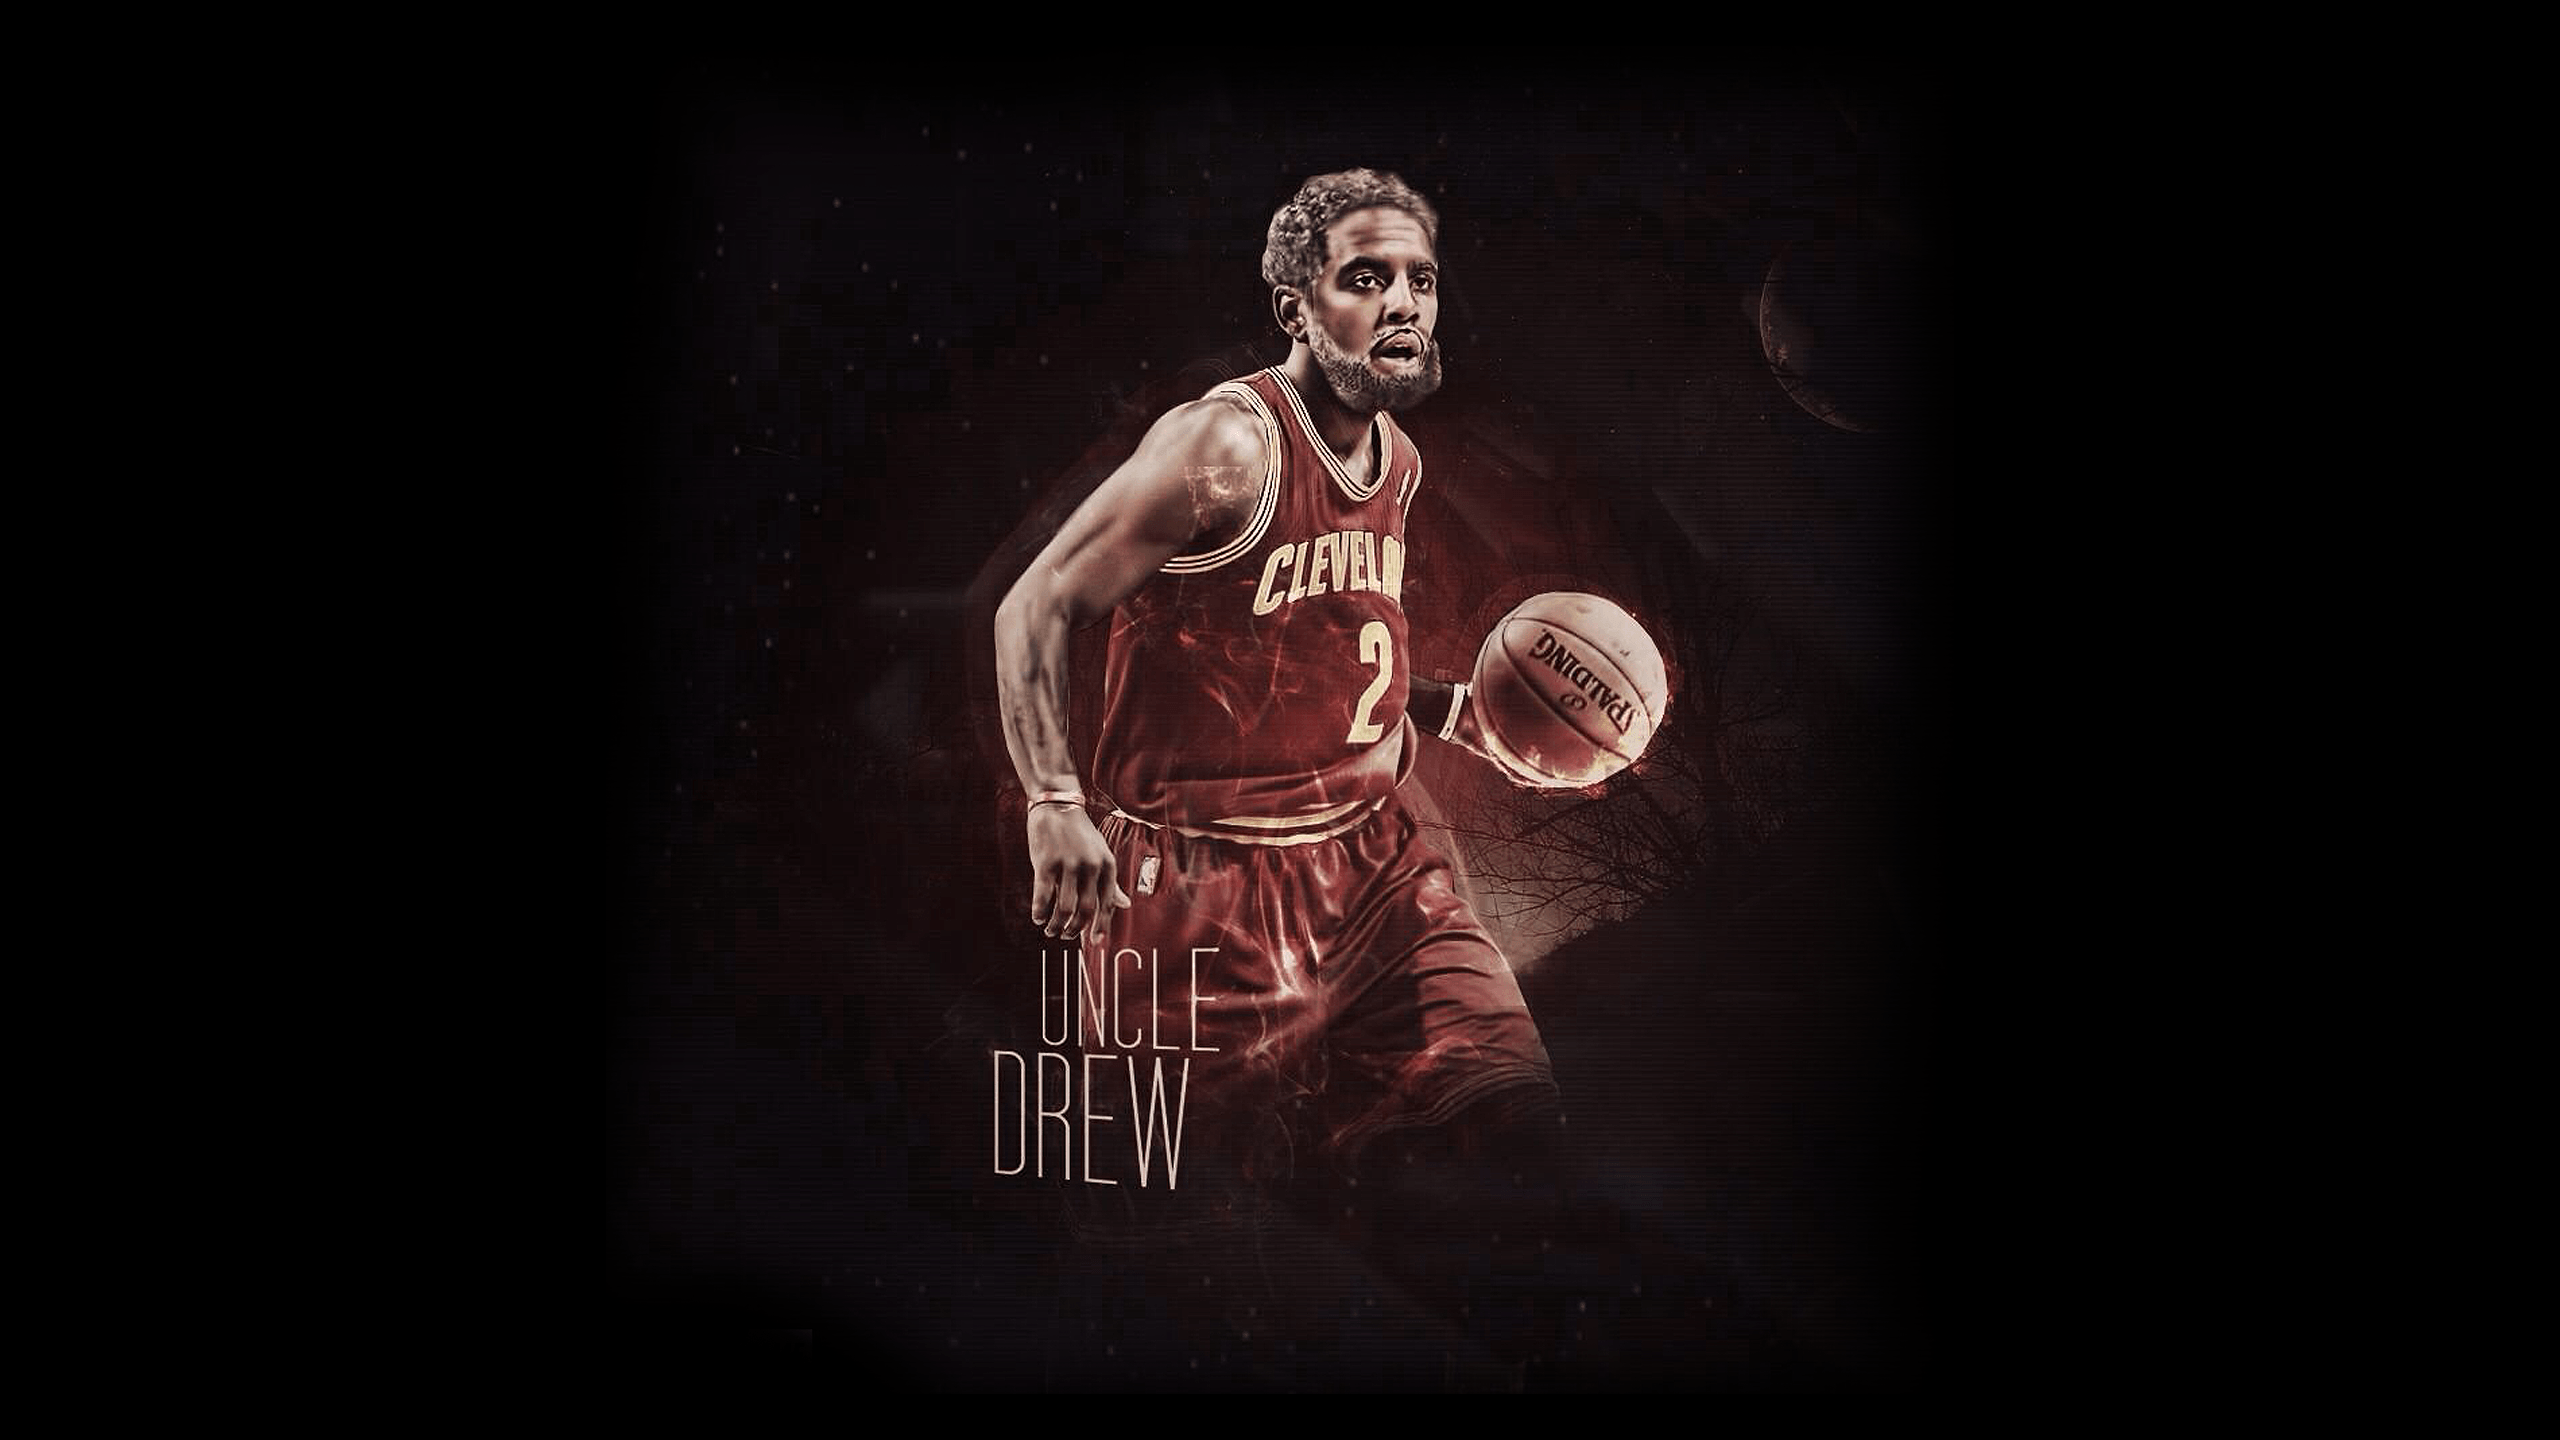 Cleveland Cavaliers. Kyrie Irving, Uncle Drew Wallpaper. Cleveland